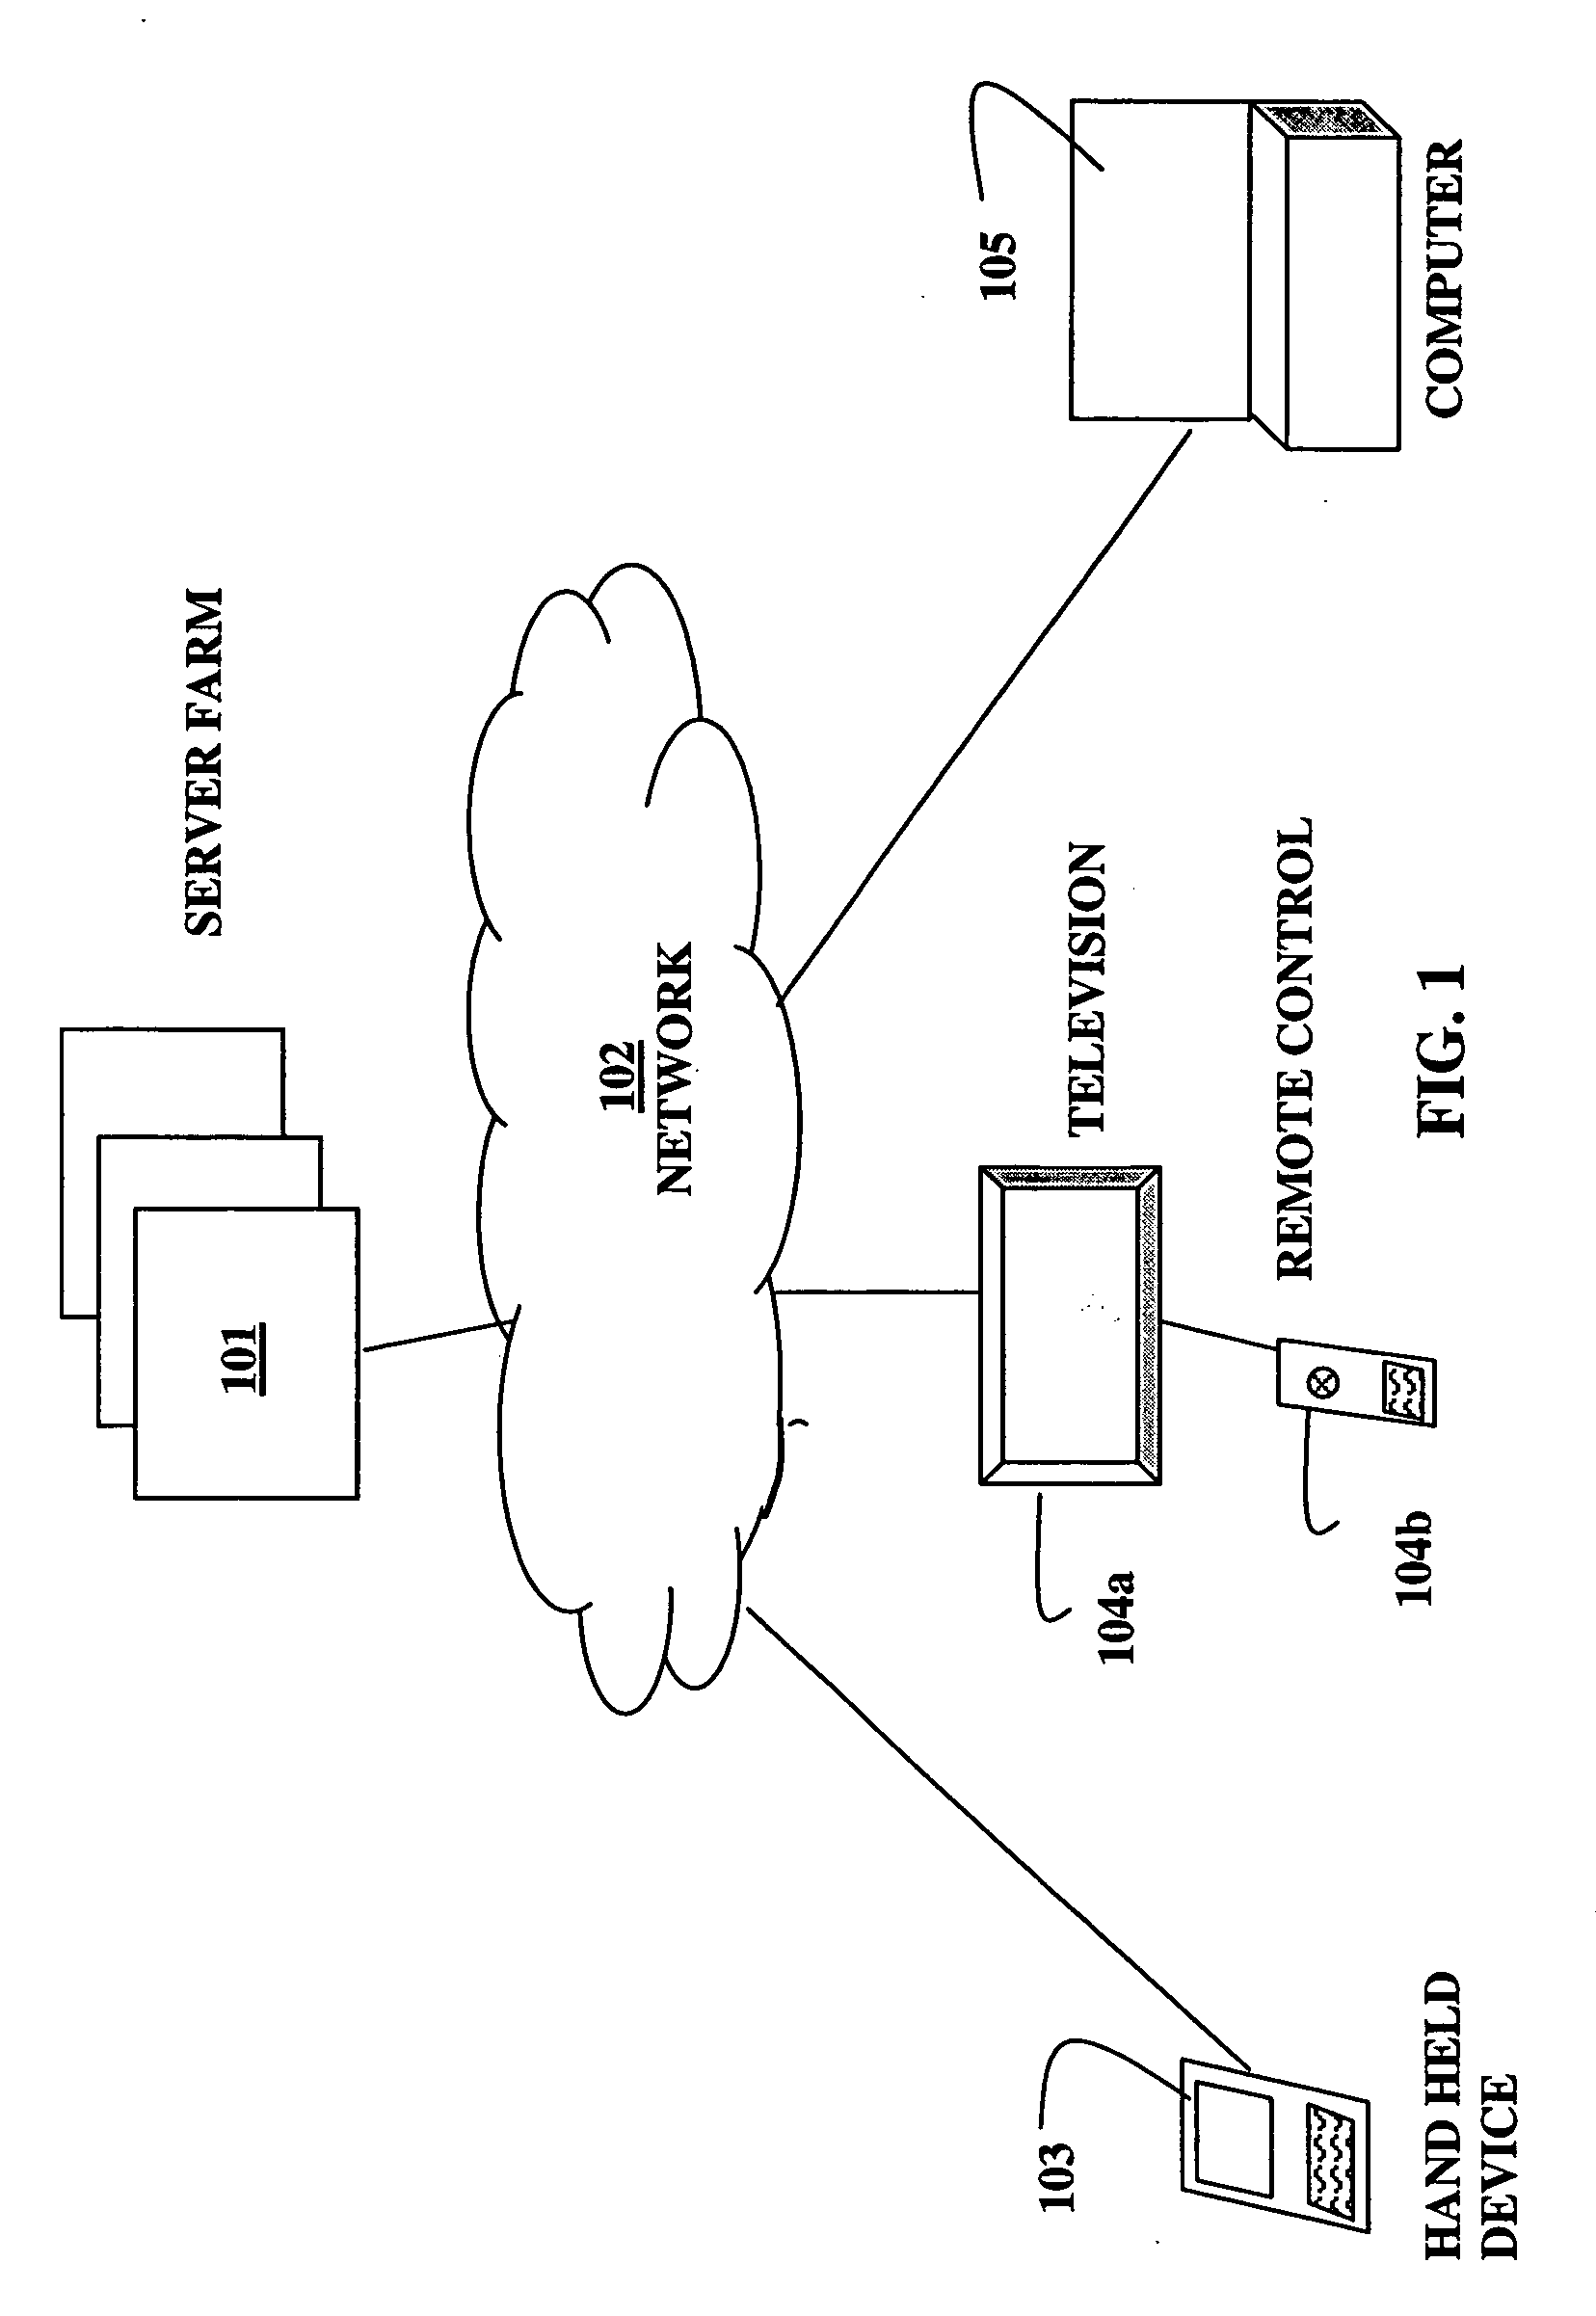 Method and system for incremental search with reduced text entry where the relevance of results is a dynamically computed function of user input search string character count